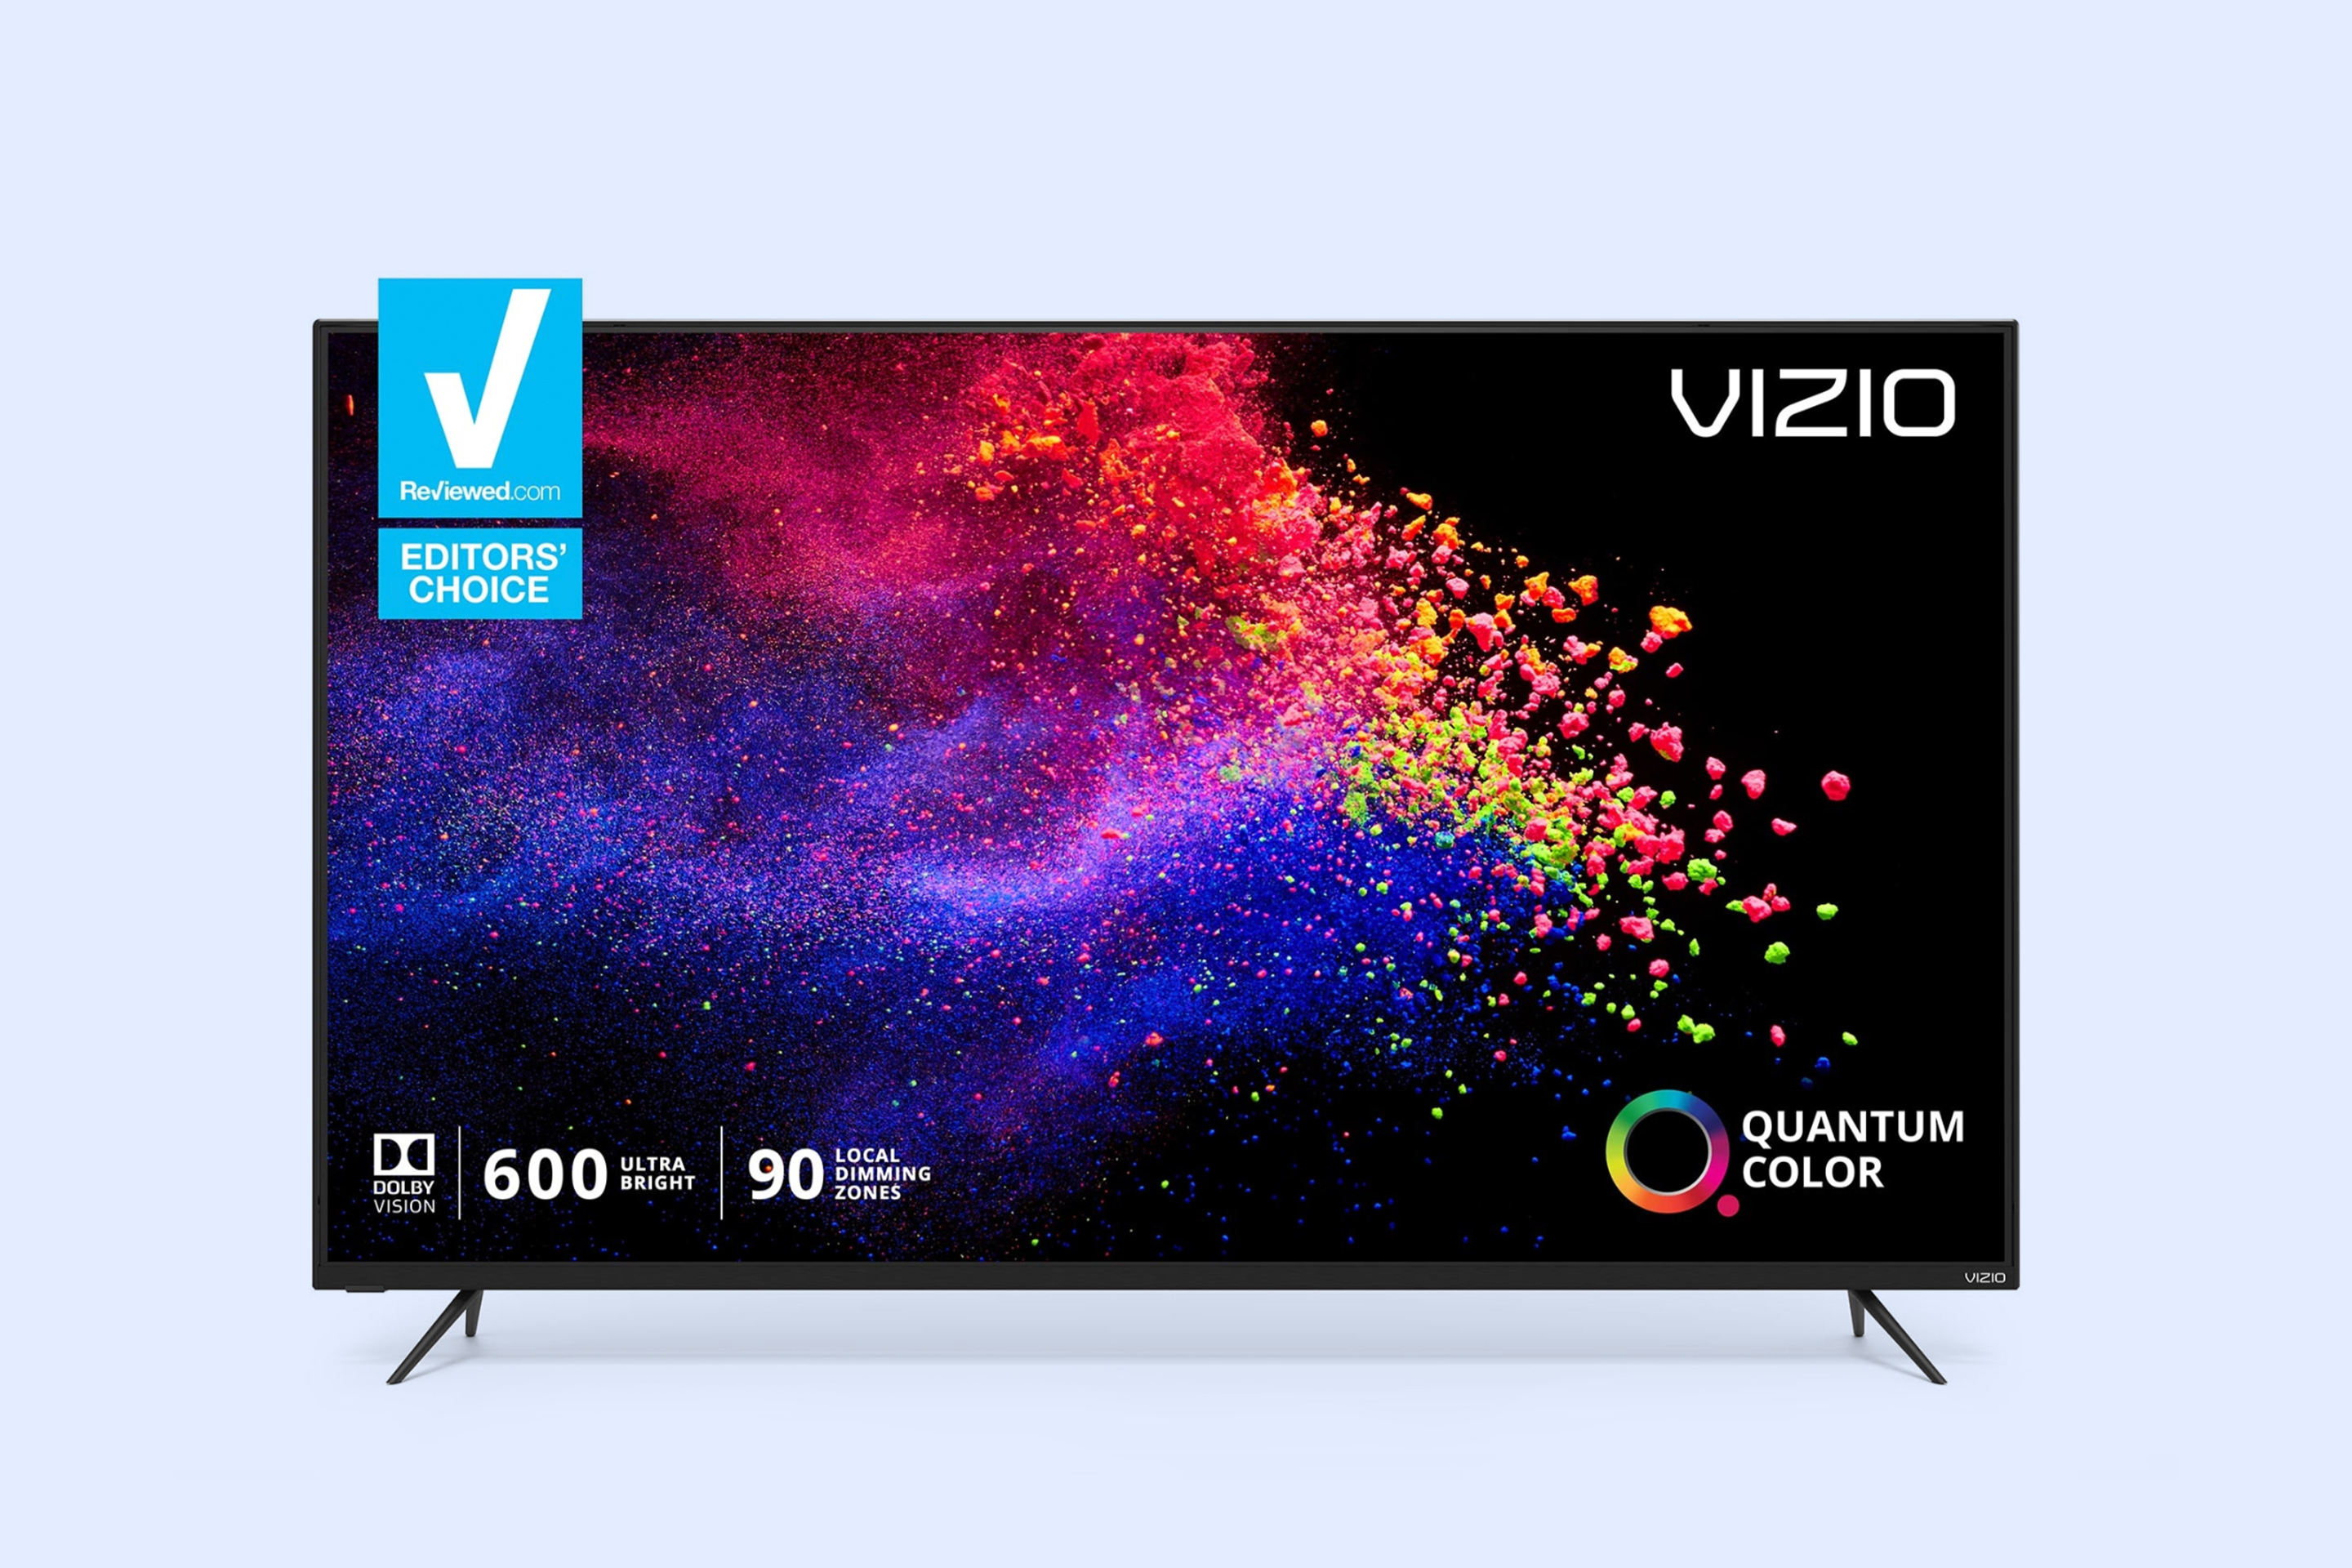 Vizio Dolby Vision Smart TV with Quantum Color and Abstract Art on Screen